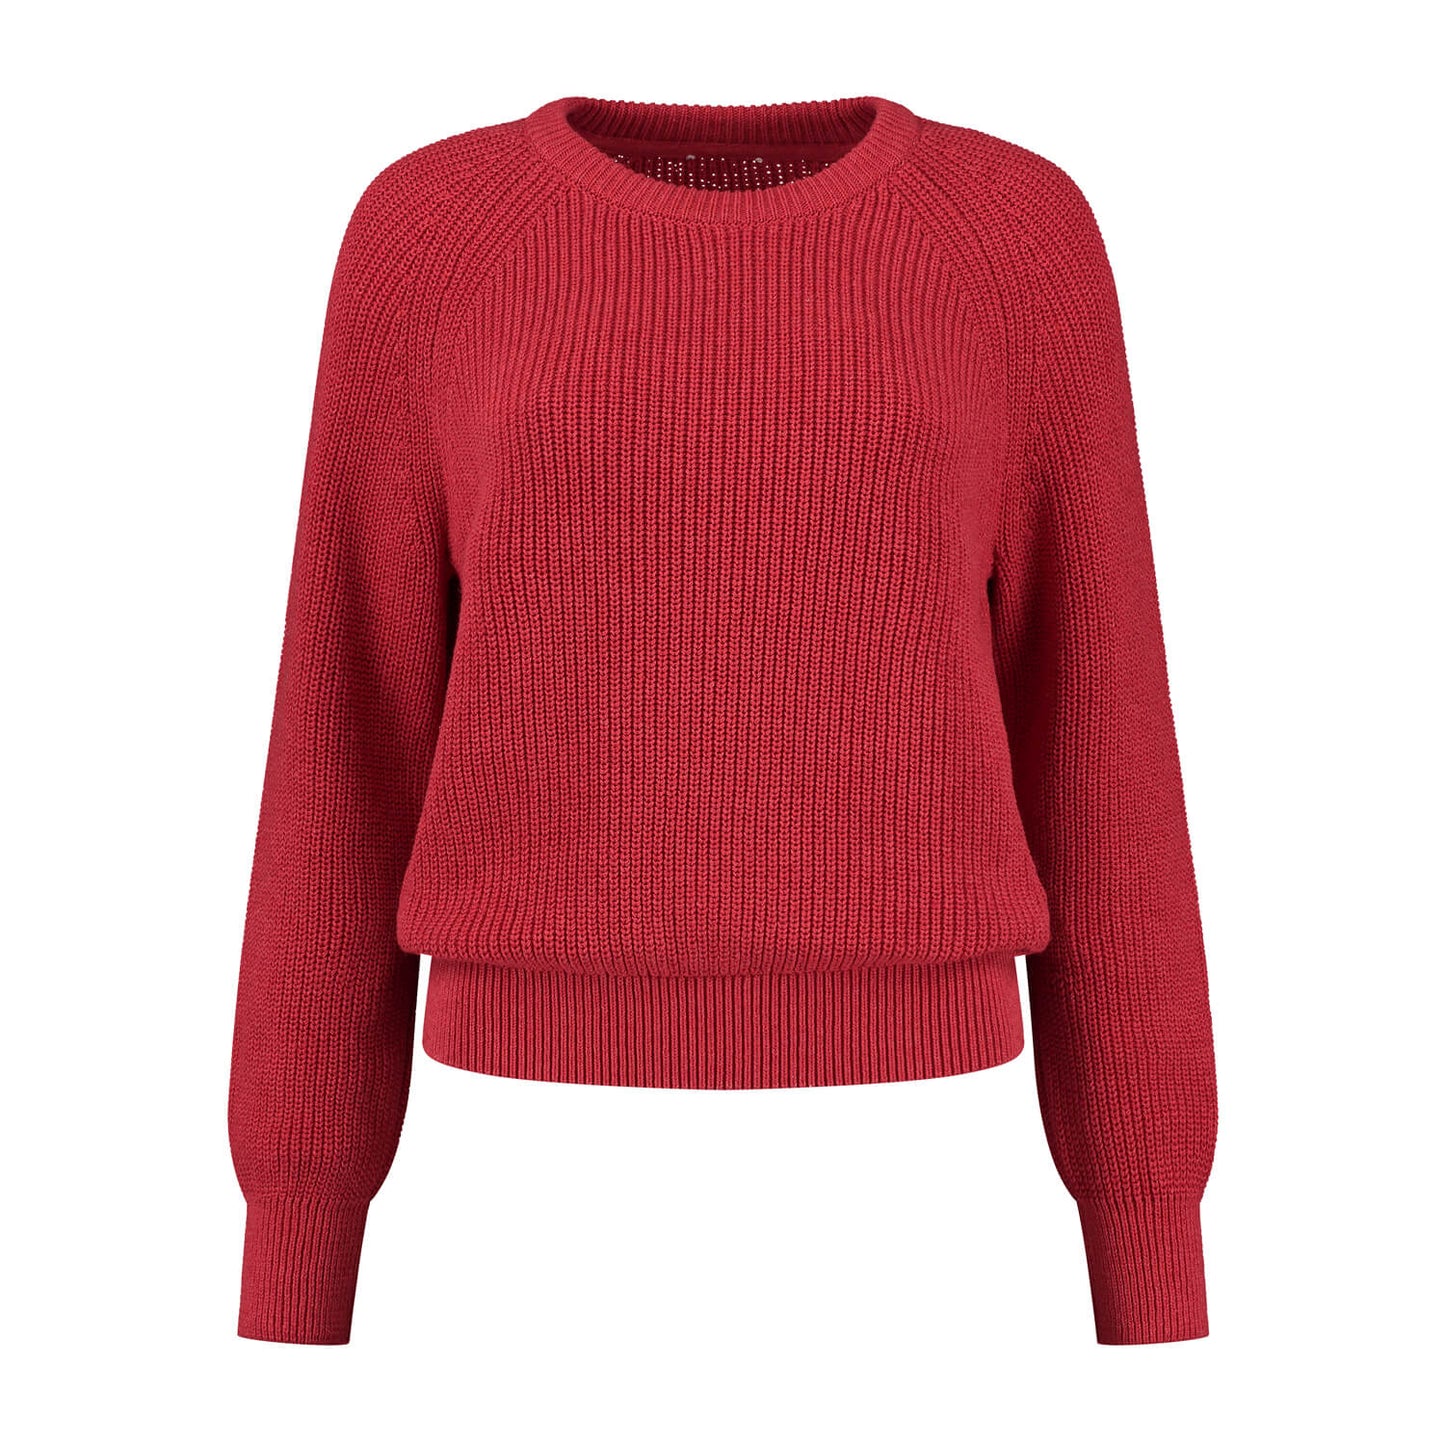 Knitted jumper Recycled Cotton Red | Circular design from Amsterdam ...